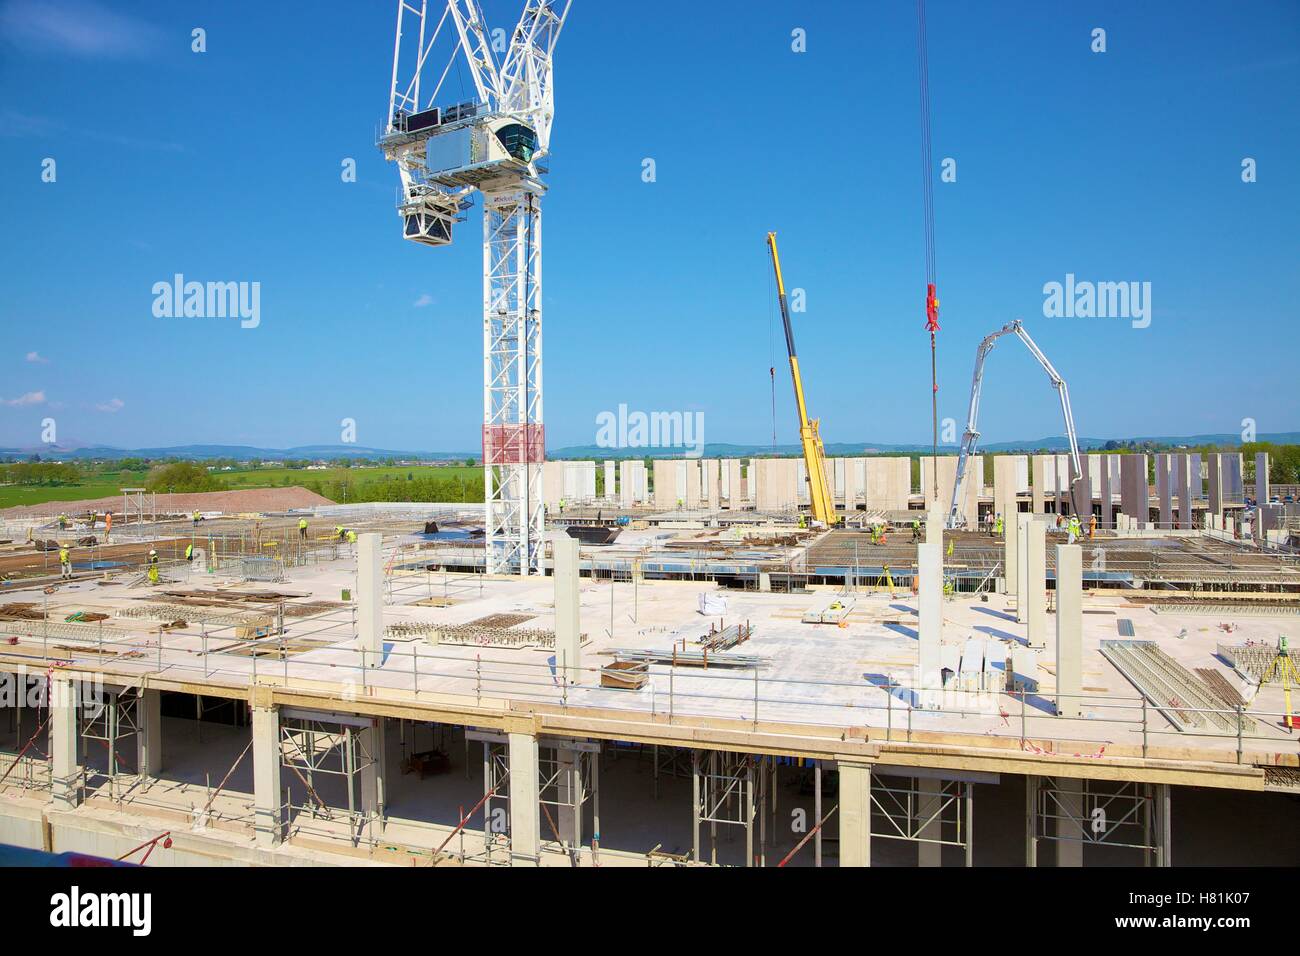 Prefabricated construction using a crane. Workers wearing safety clothing on the building site. Stock Photo